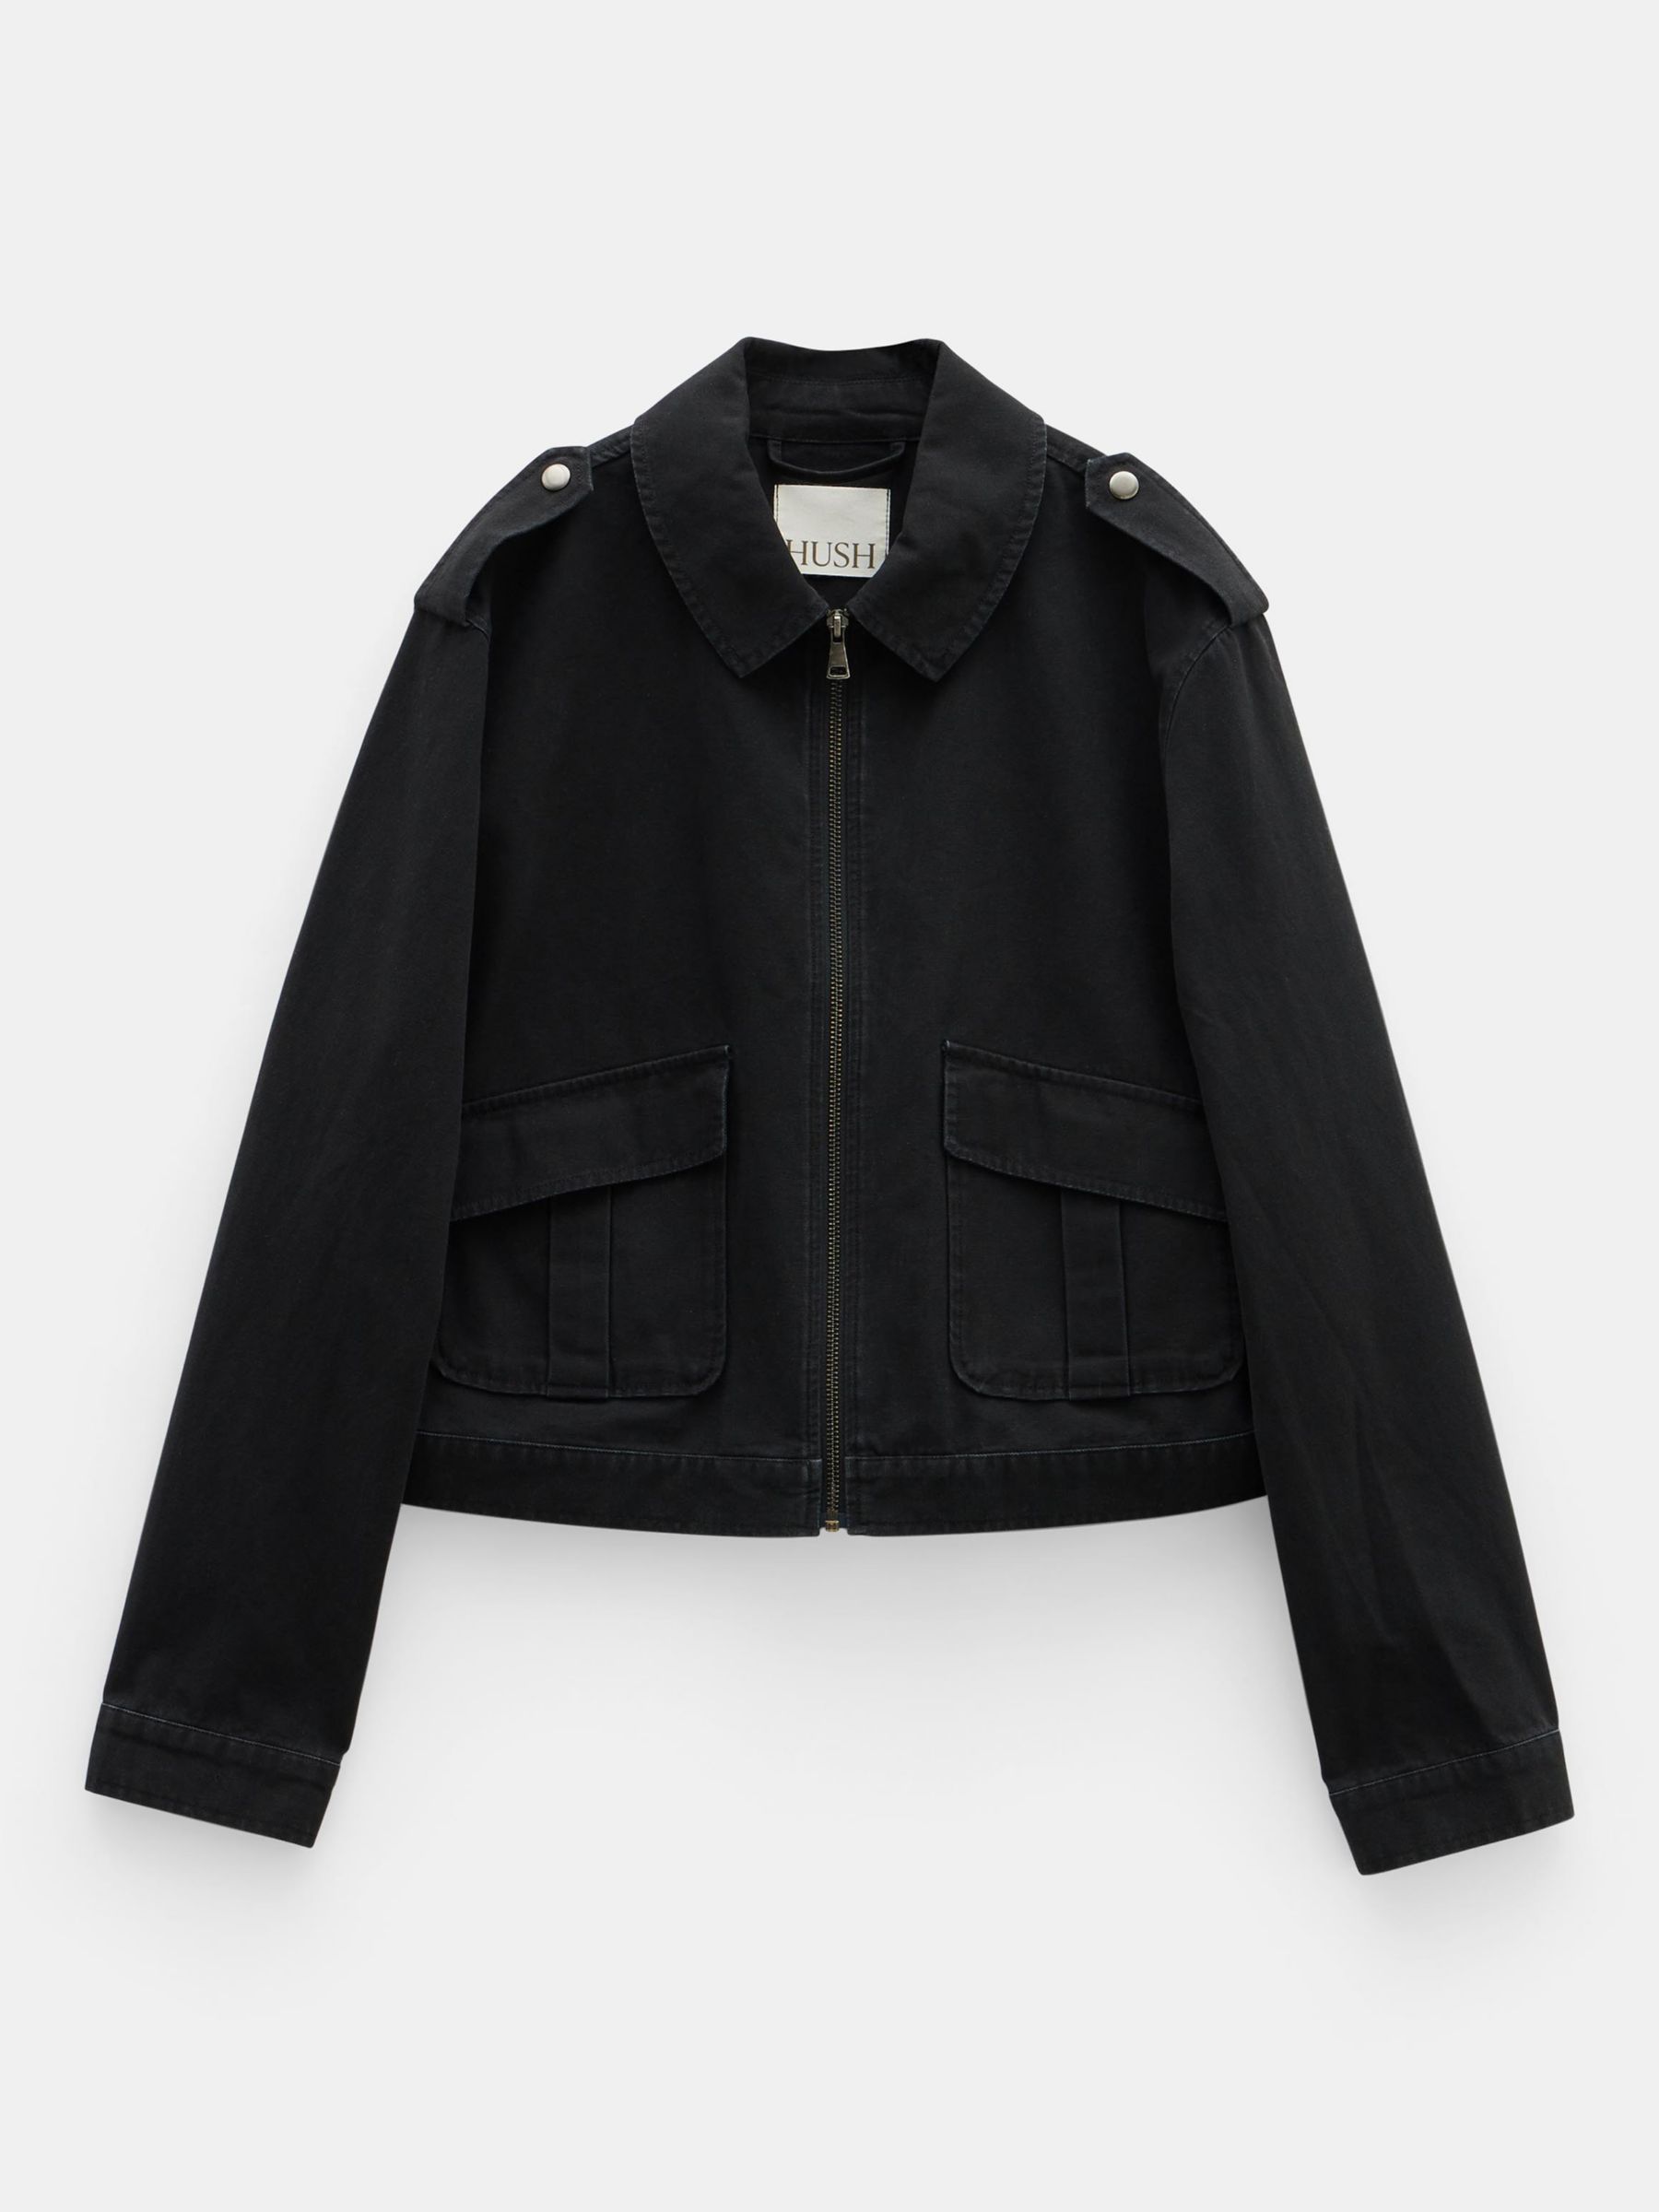 Buy HUSH Laurie Zip Up Utility Jacket Online at johnlewis.com